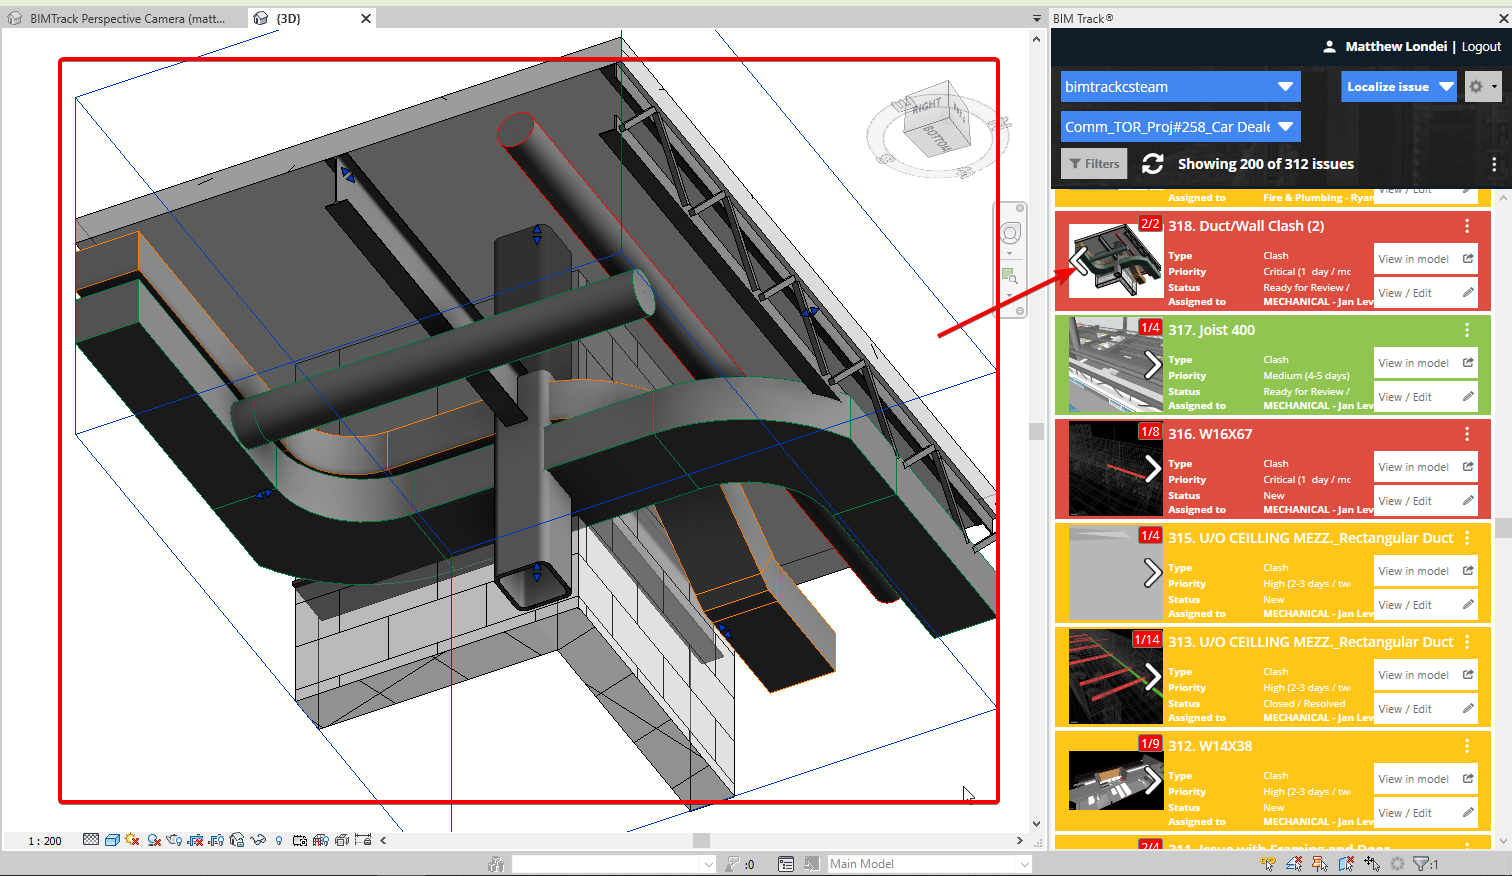 Navigating between different views of an issue in BIM Track